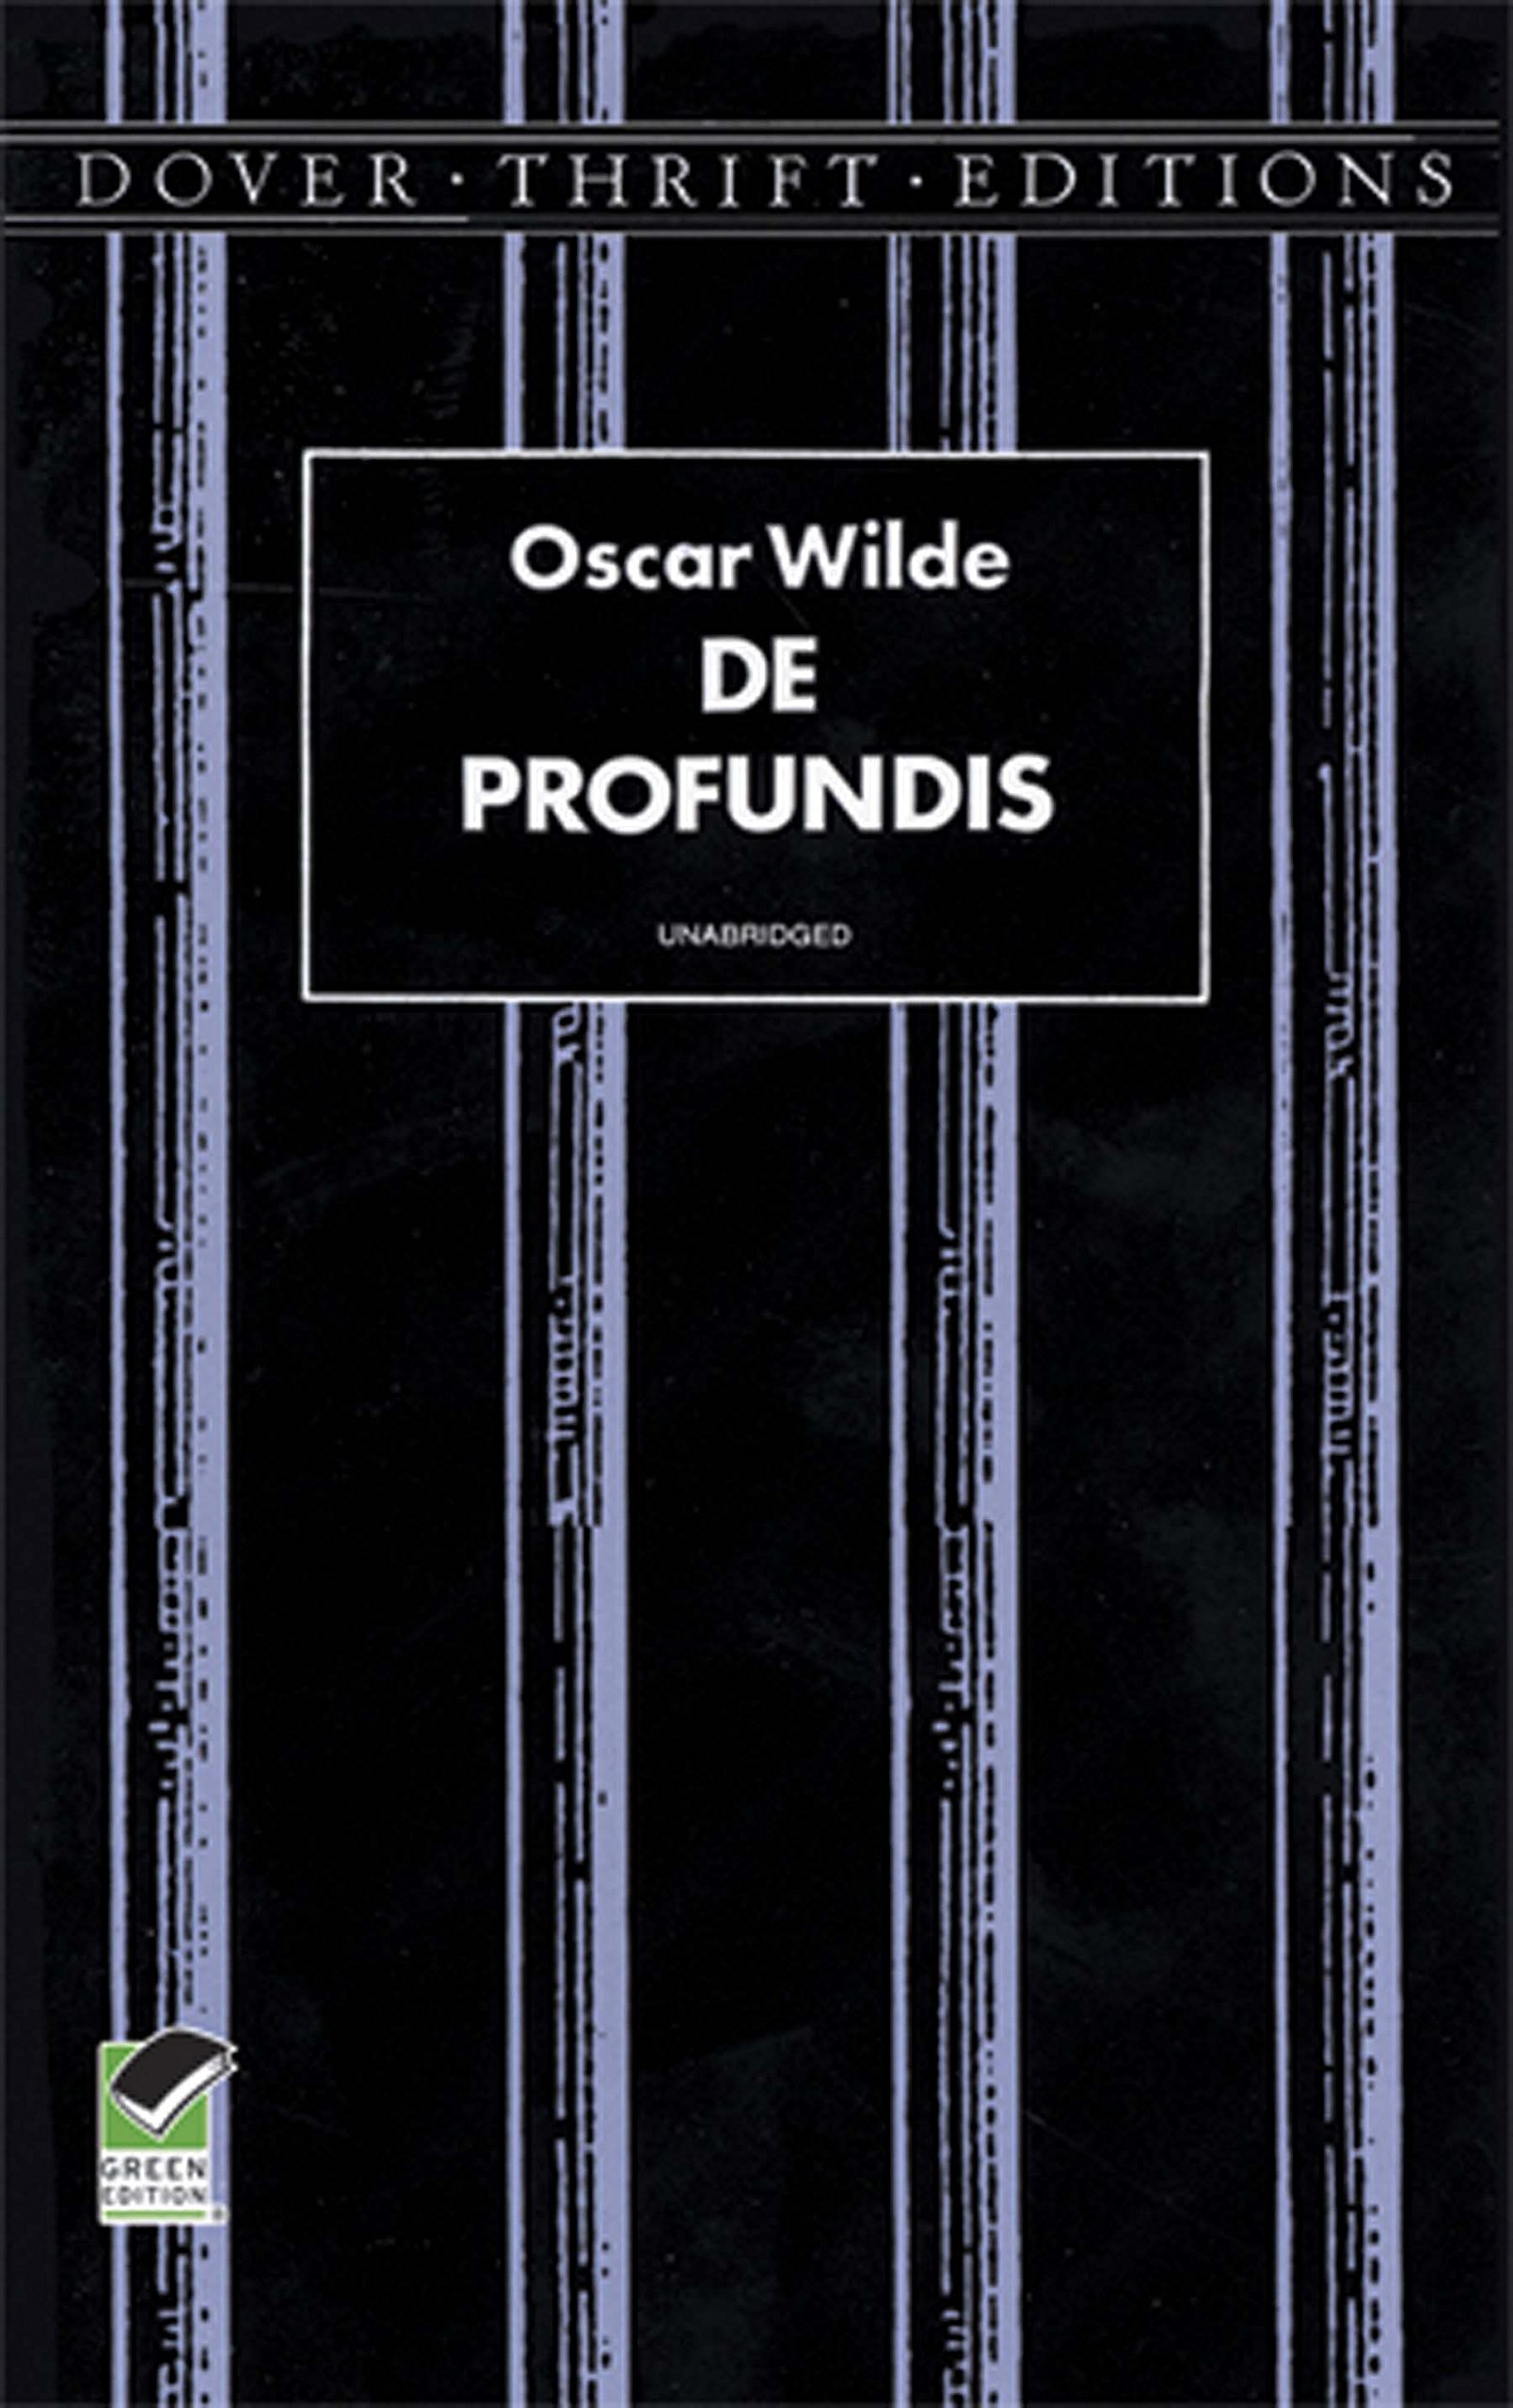 De Profundis (Dover Thrift Editions: Literary Collections)